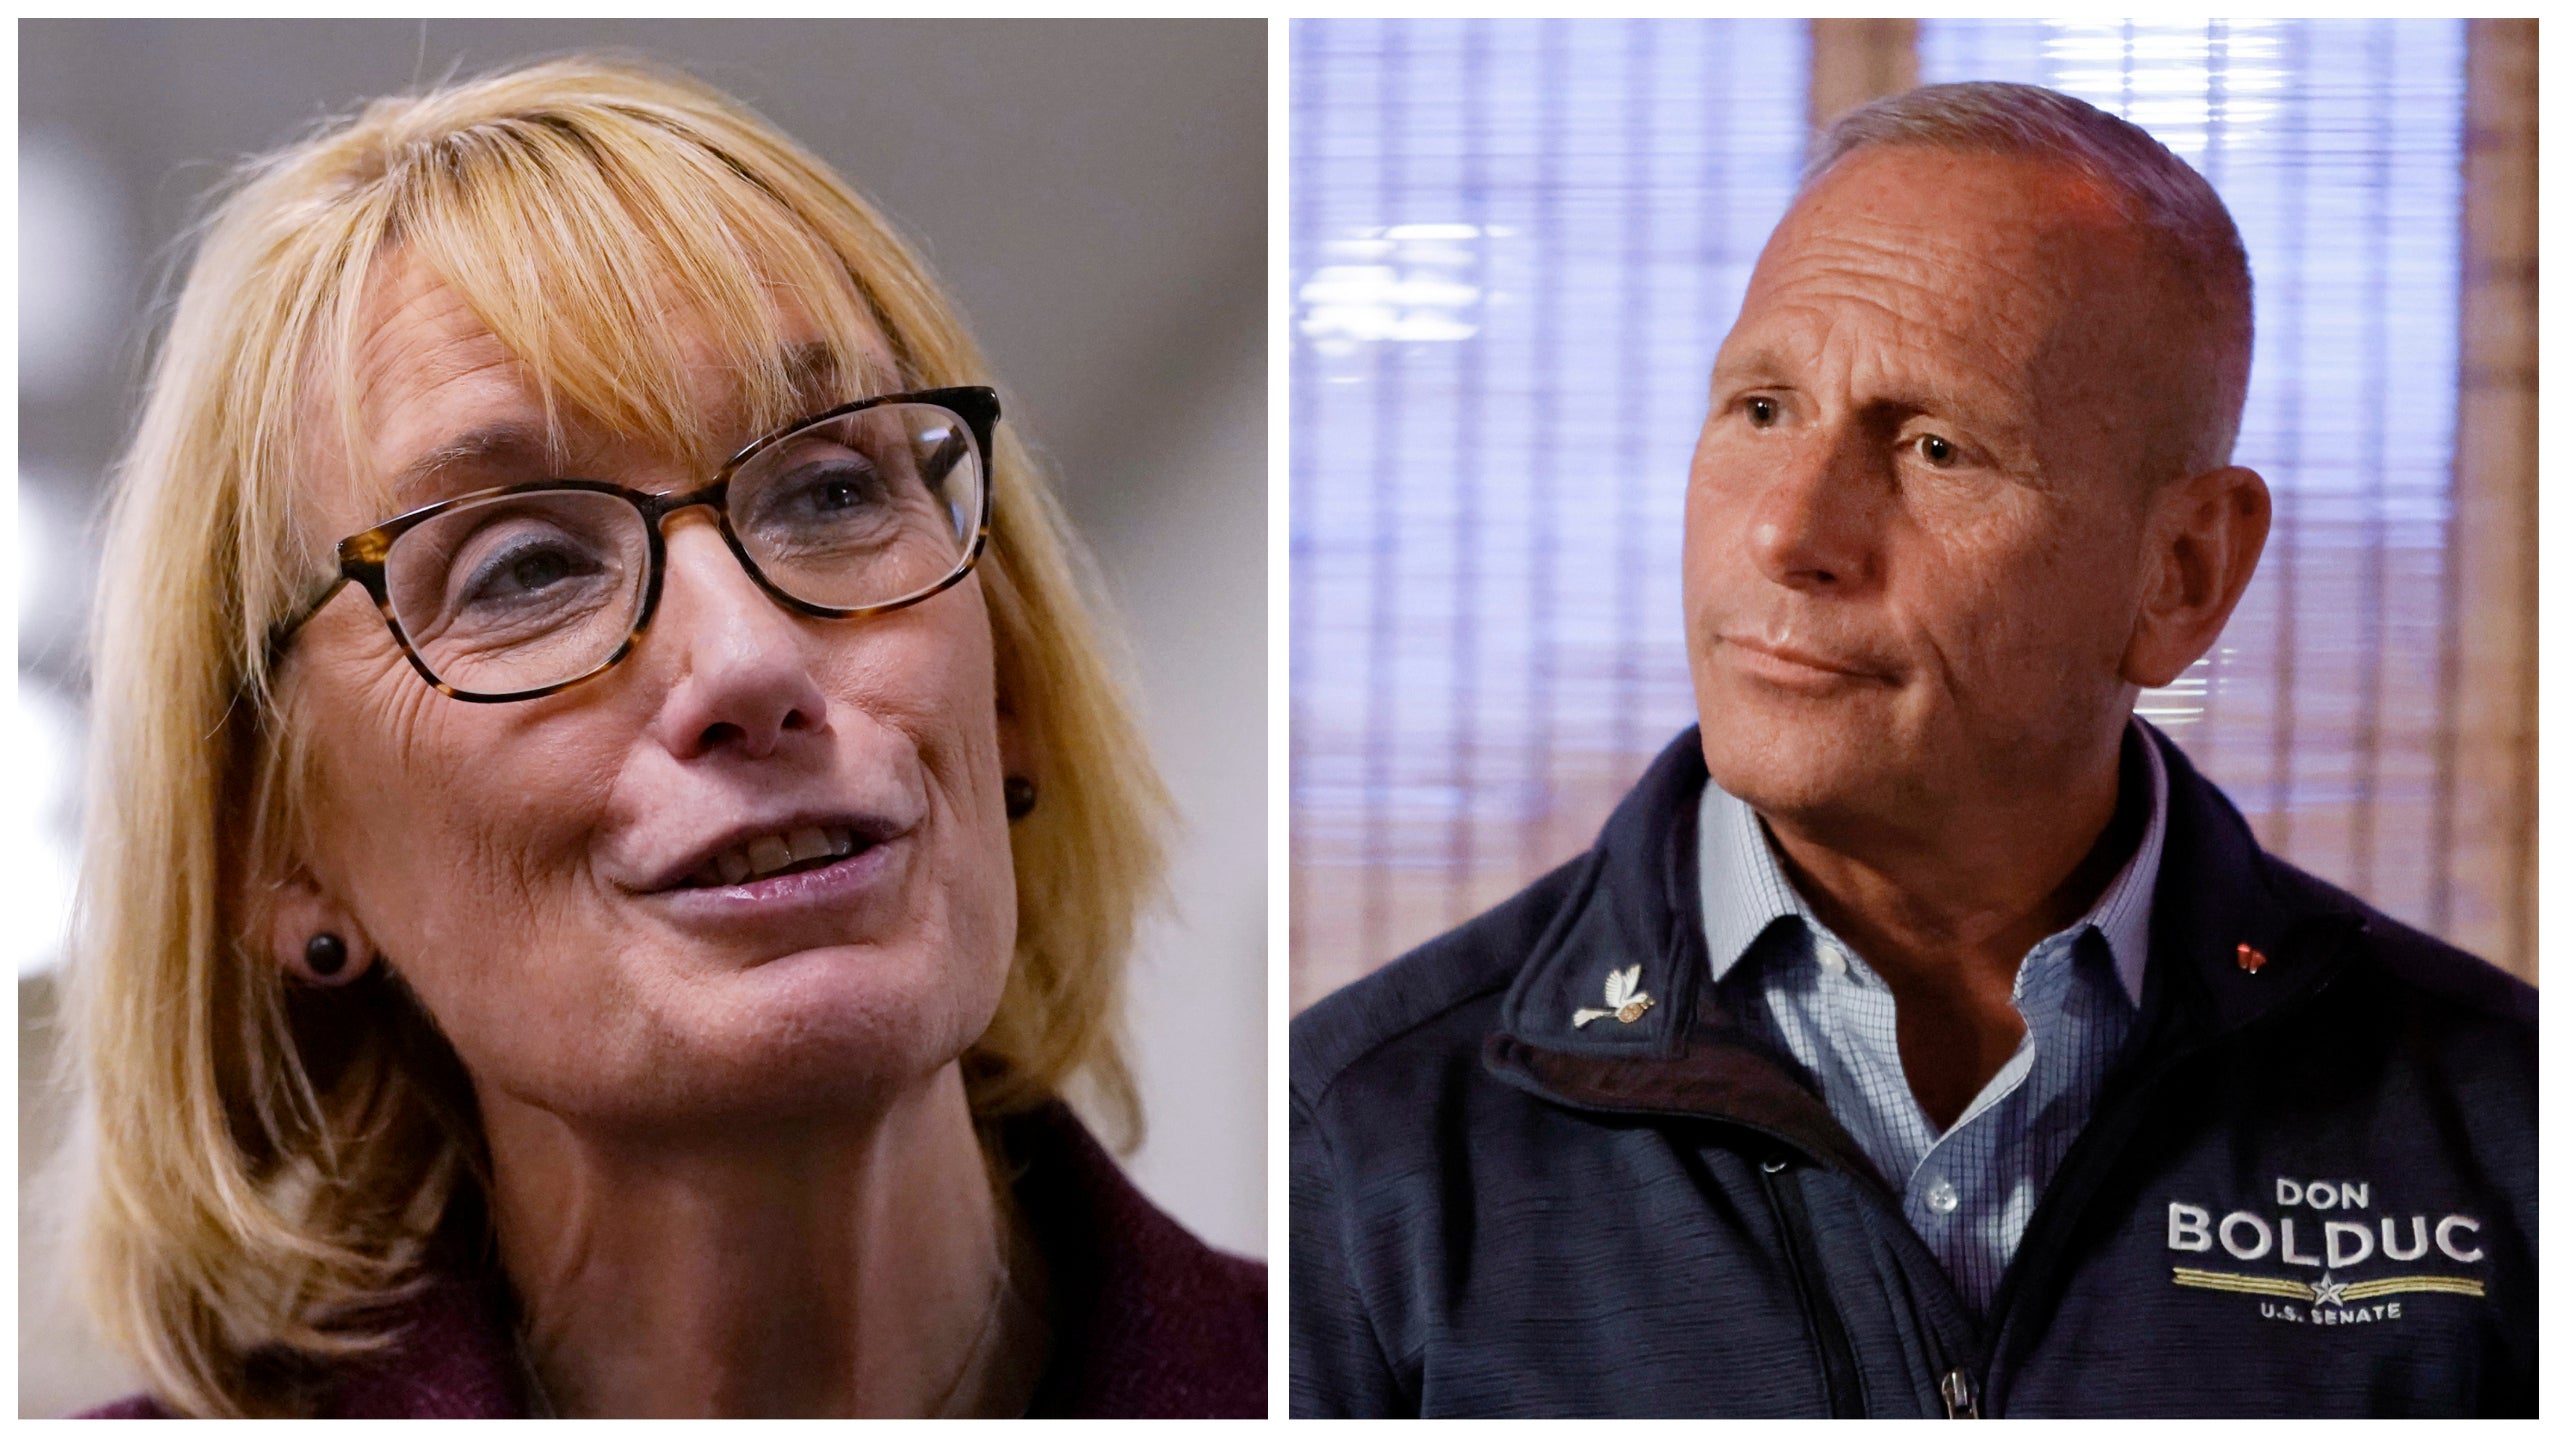 Senator Maggie Hassan, Democrat of New Hampshire (left), is running for reelection against Republican Don Bolduc